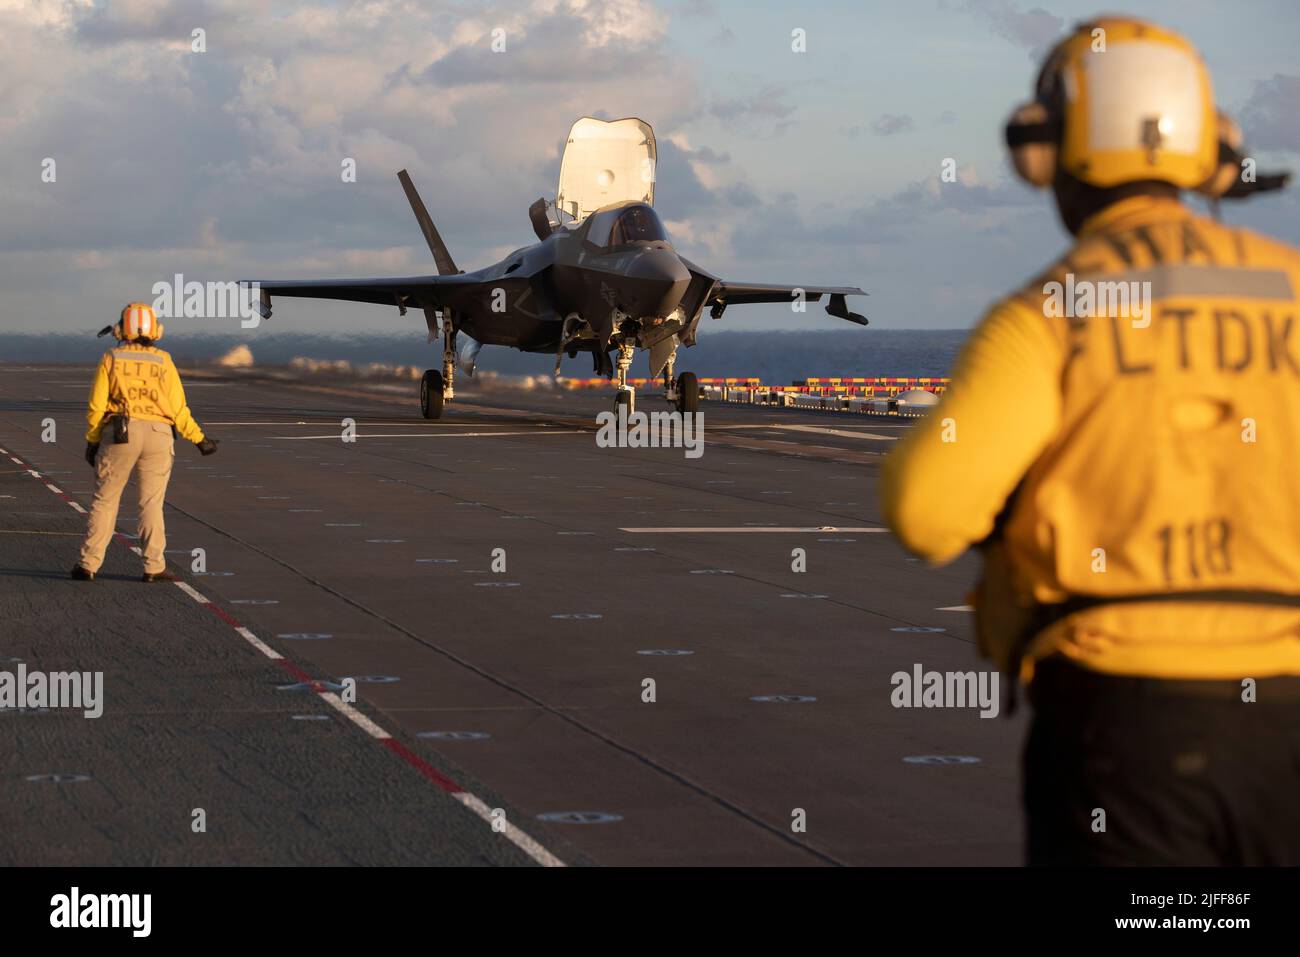 220701-N-XN177-1221 EAST CHINA SEA (July 1, 2022) – An F-35B Lightning II aircraft assigned to Marine Strike Fighter Squadron (VMFA) 121 launches from the flight deck aboard amphibious assault carrier USS Tripoli (LHA 7), July 1, 2022. Tripoli is operating in the U.S. 7th Fleet area of operations to enhance interoperability with allies and partners and serve as a ready response force to defend peace and maintain stability in the Indo-Pacific region.  (U.S. Navy photo by Mass Communication Specialist 1st Class Peter Burghart) Stock Photo